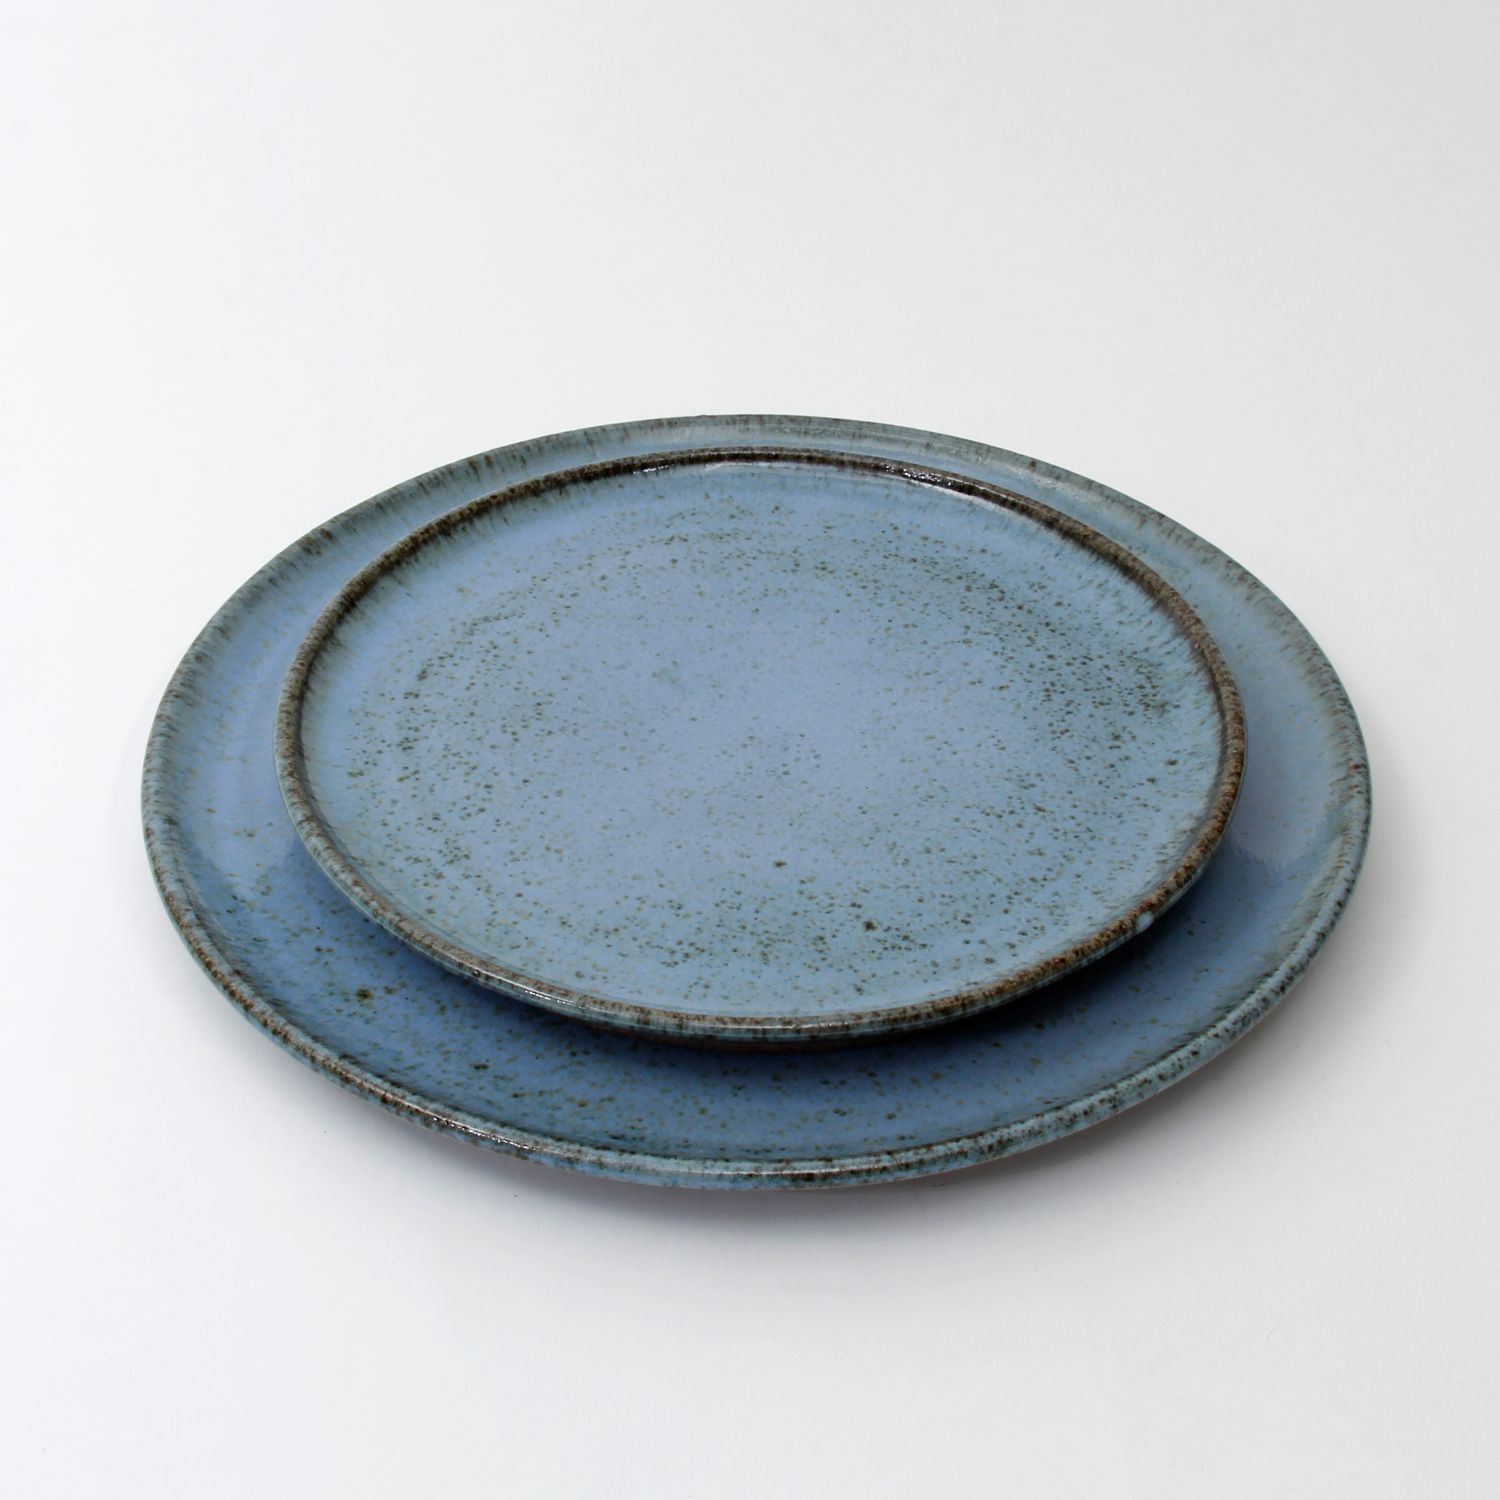 Junichi Tanaka: Dinner Plate in Blue Product Image 2 of 2